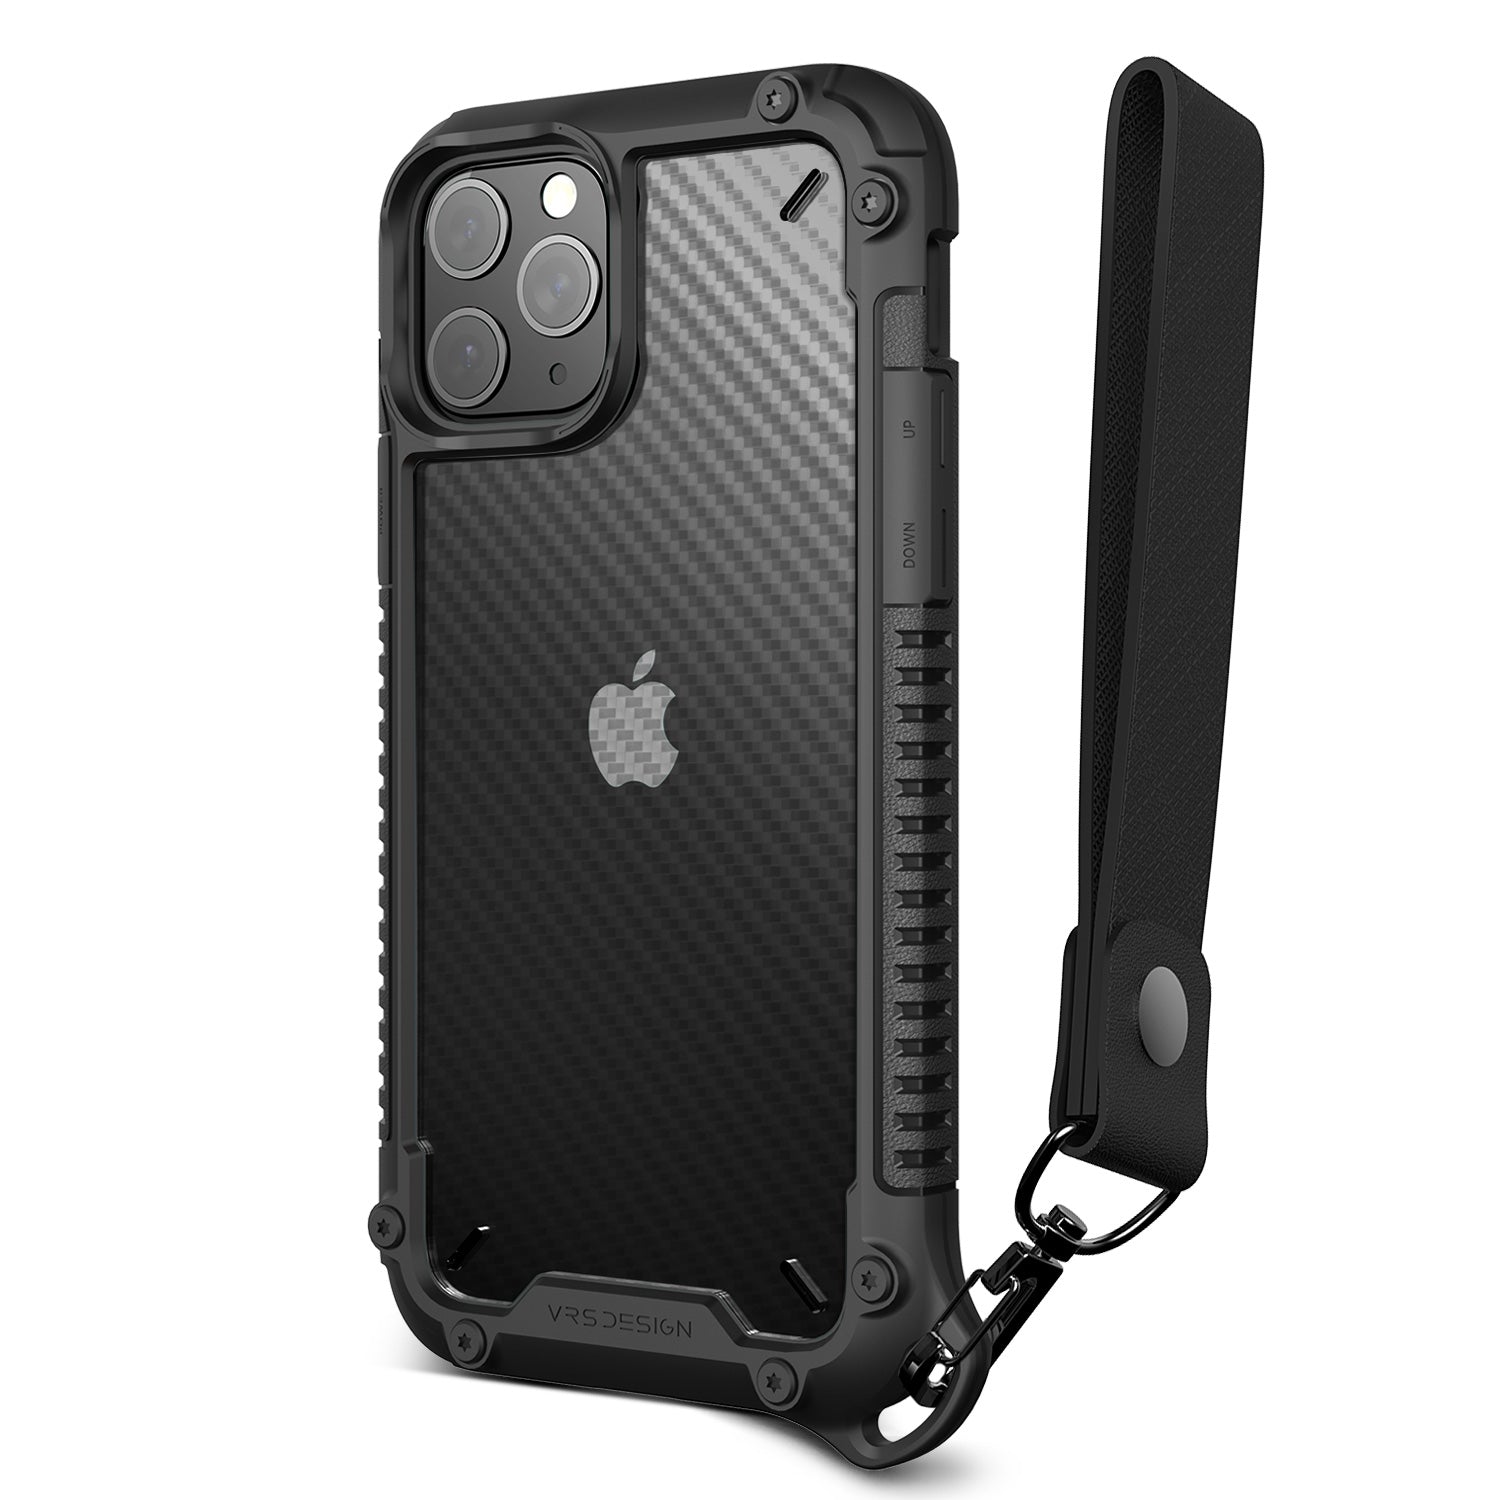 iPhone 11 Pro Case Crystal Mixx Pro Made of high-quality sturdy Acrylic body and TPU bumper provide all around double protection.